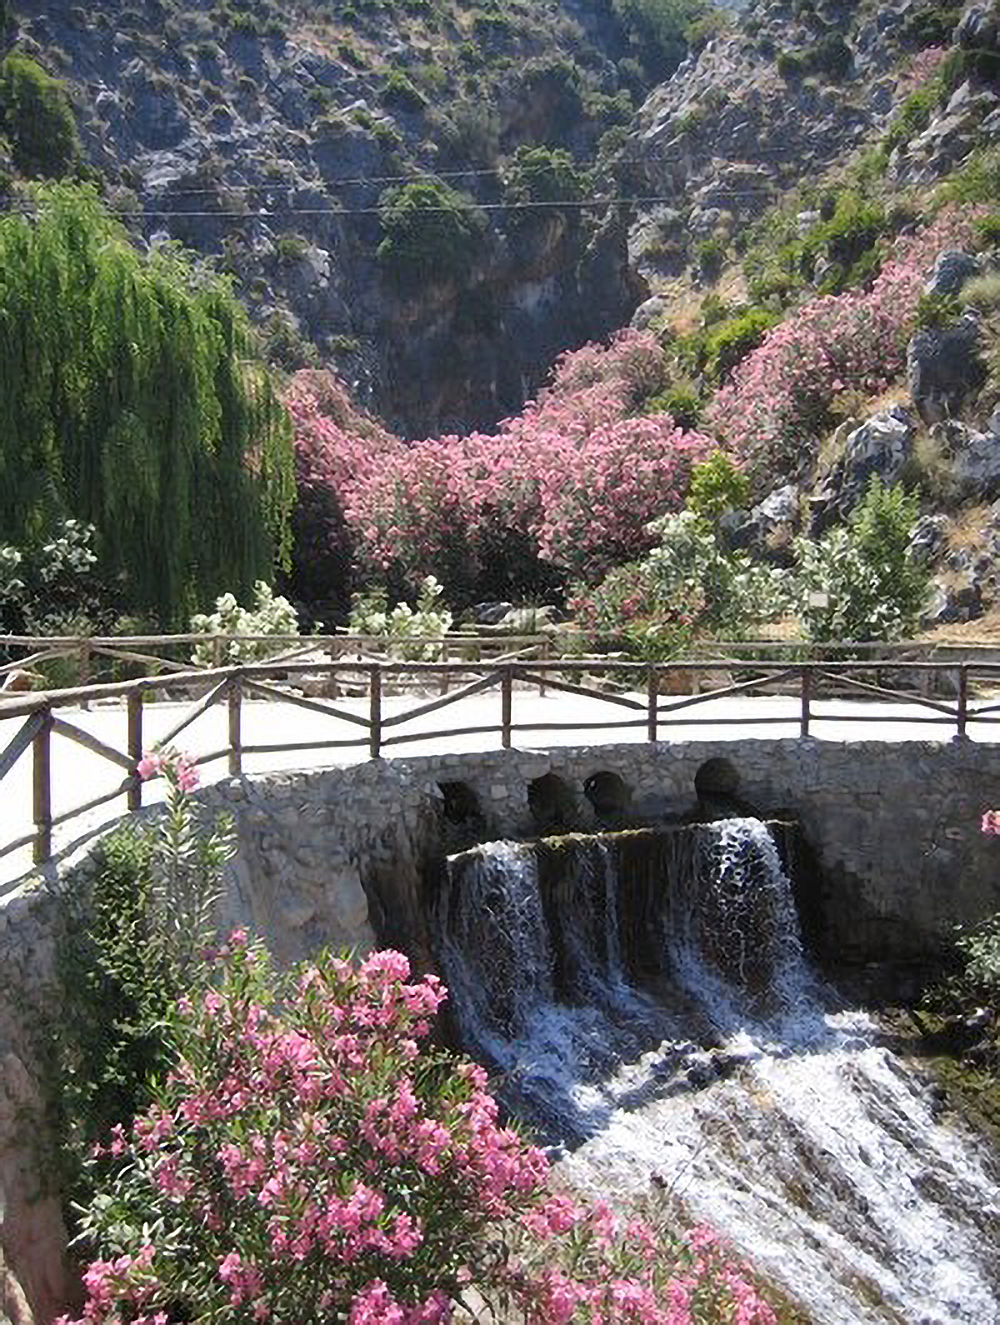 The picturesque village of Istán is known as “the fountain of Marbella”